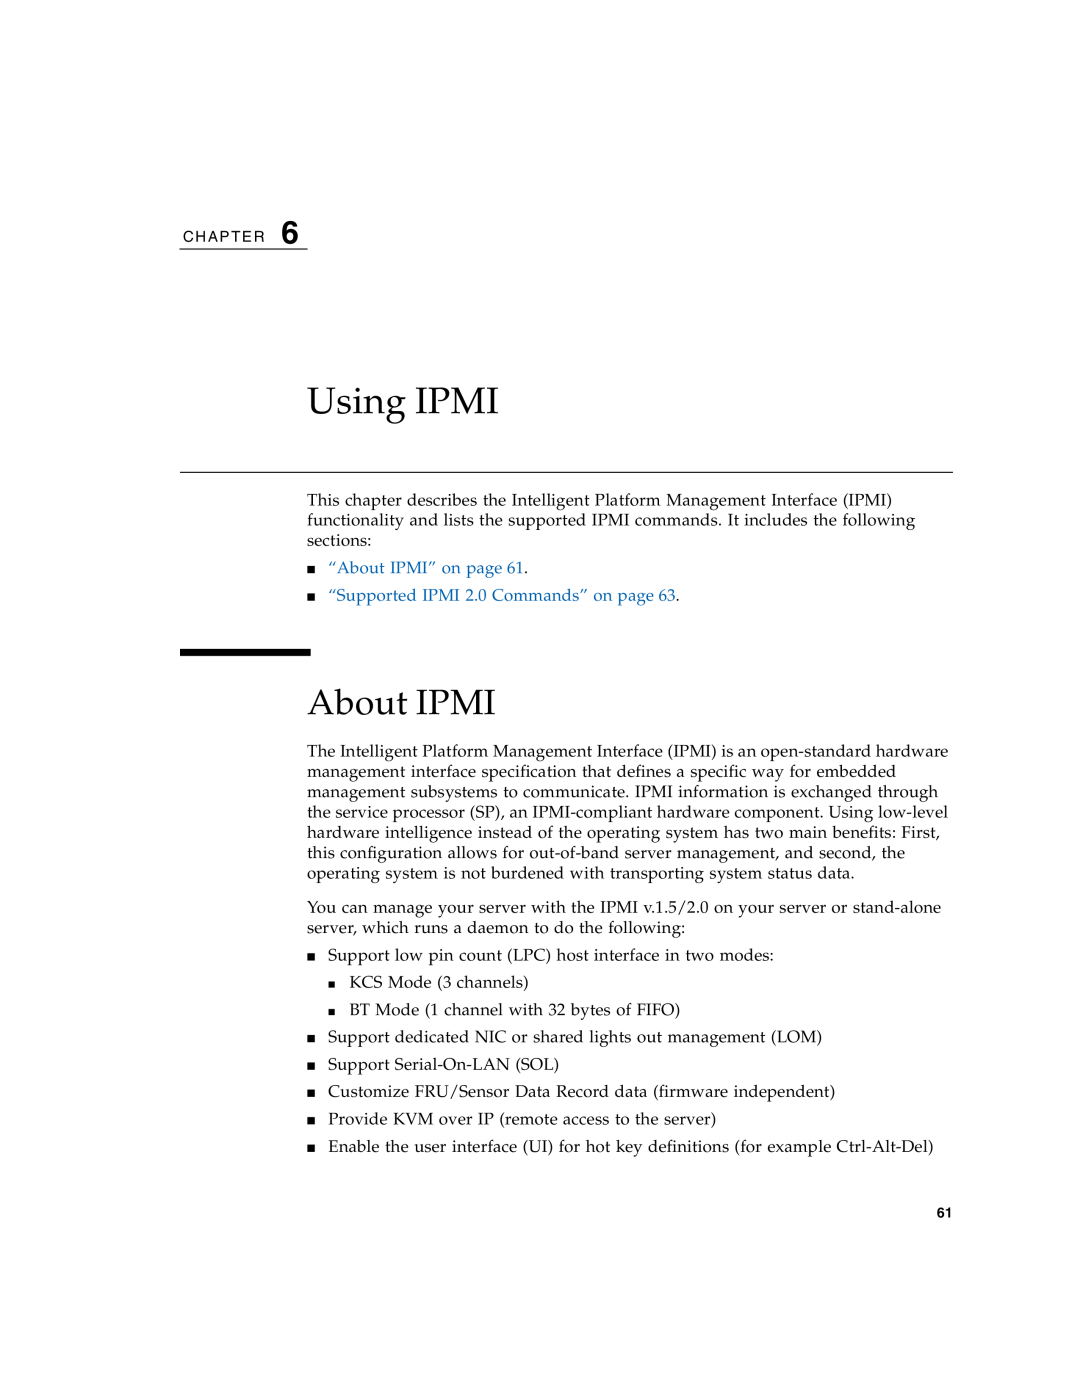 Sun Microsystems X4150 manual Using IPMI, “About IPMI” on page “Supported IPMI 2.0 Commands” on page 